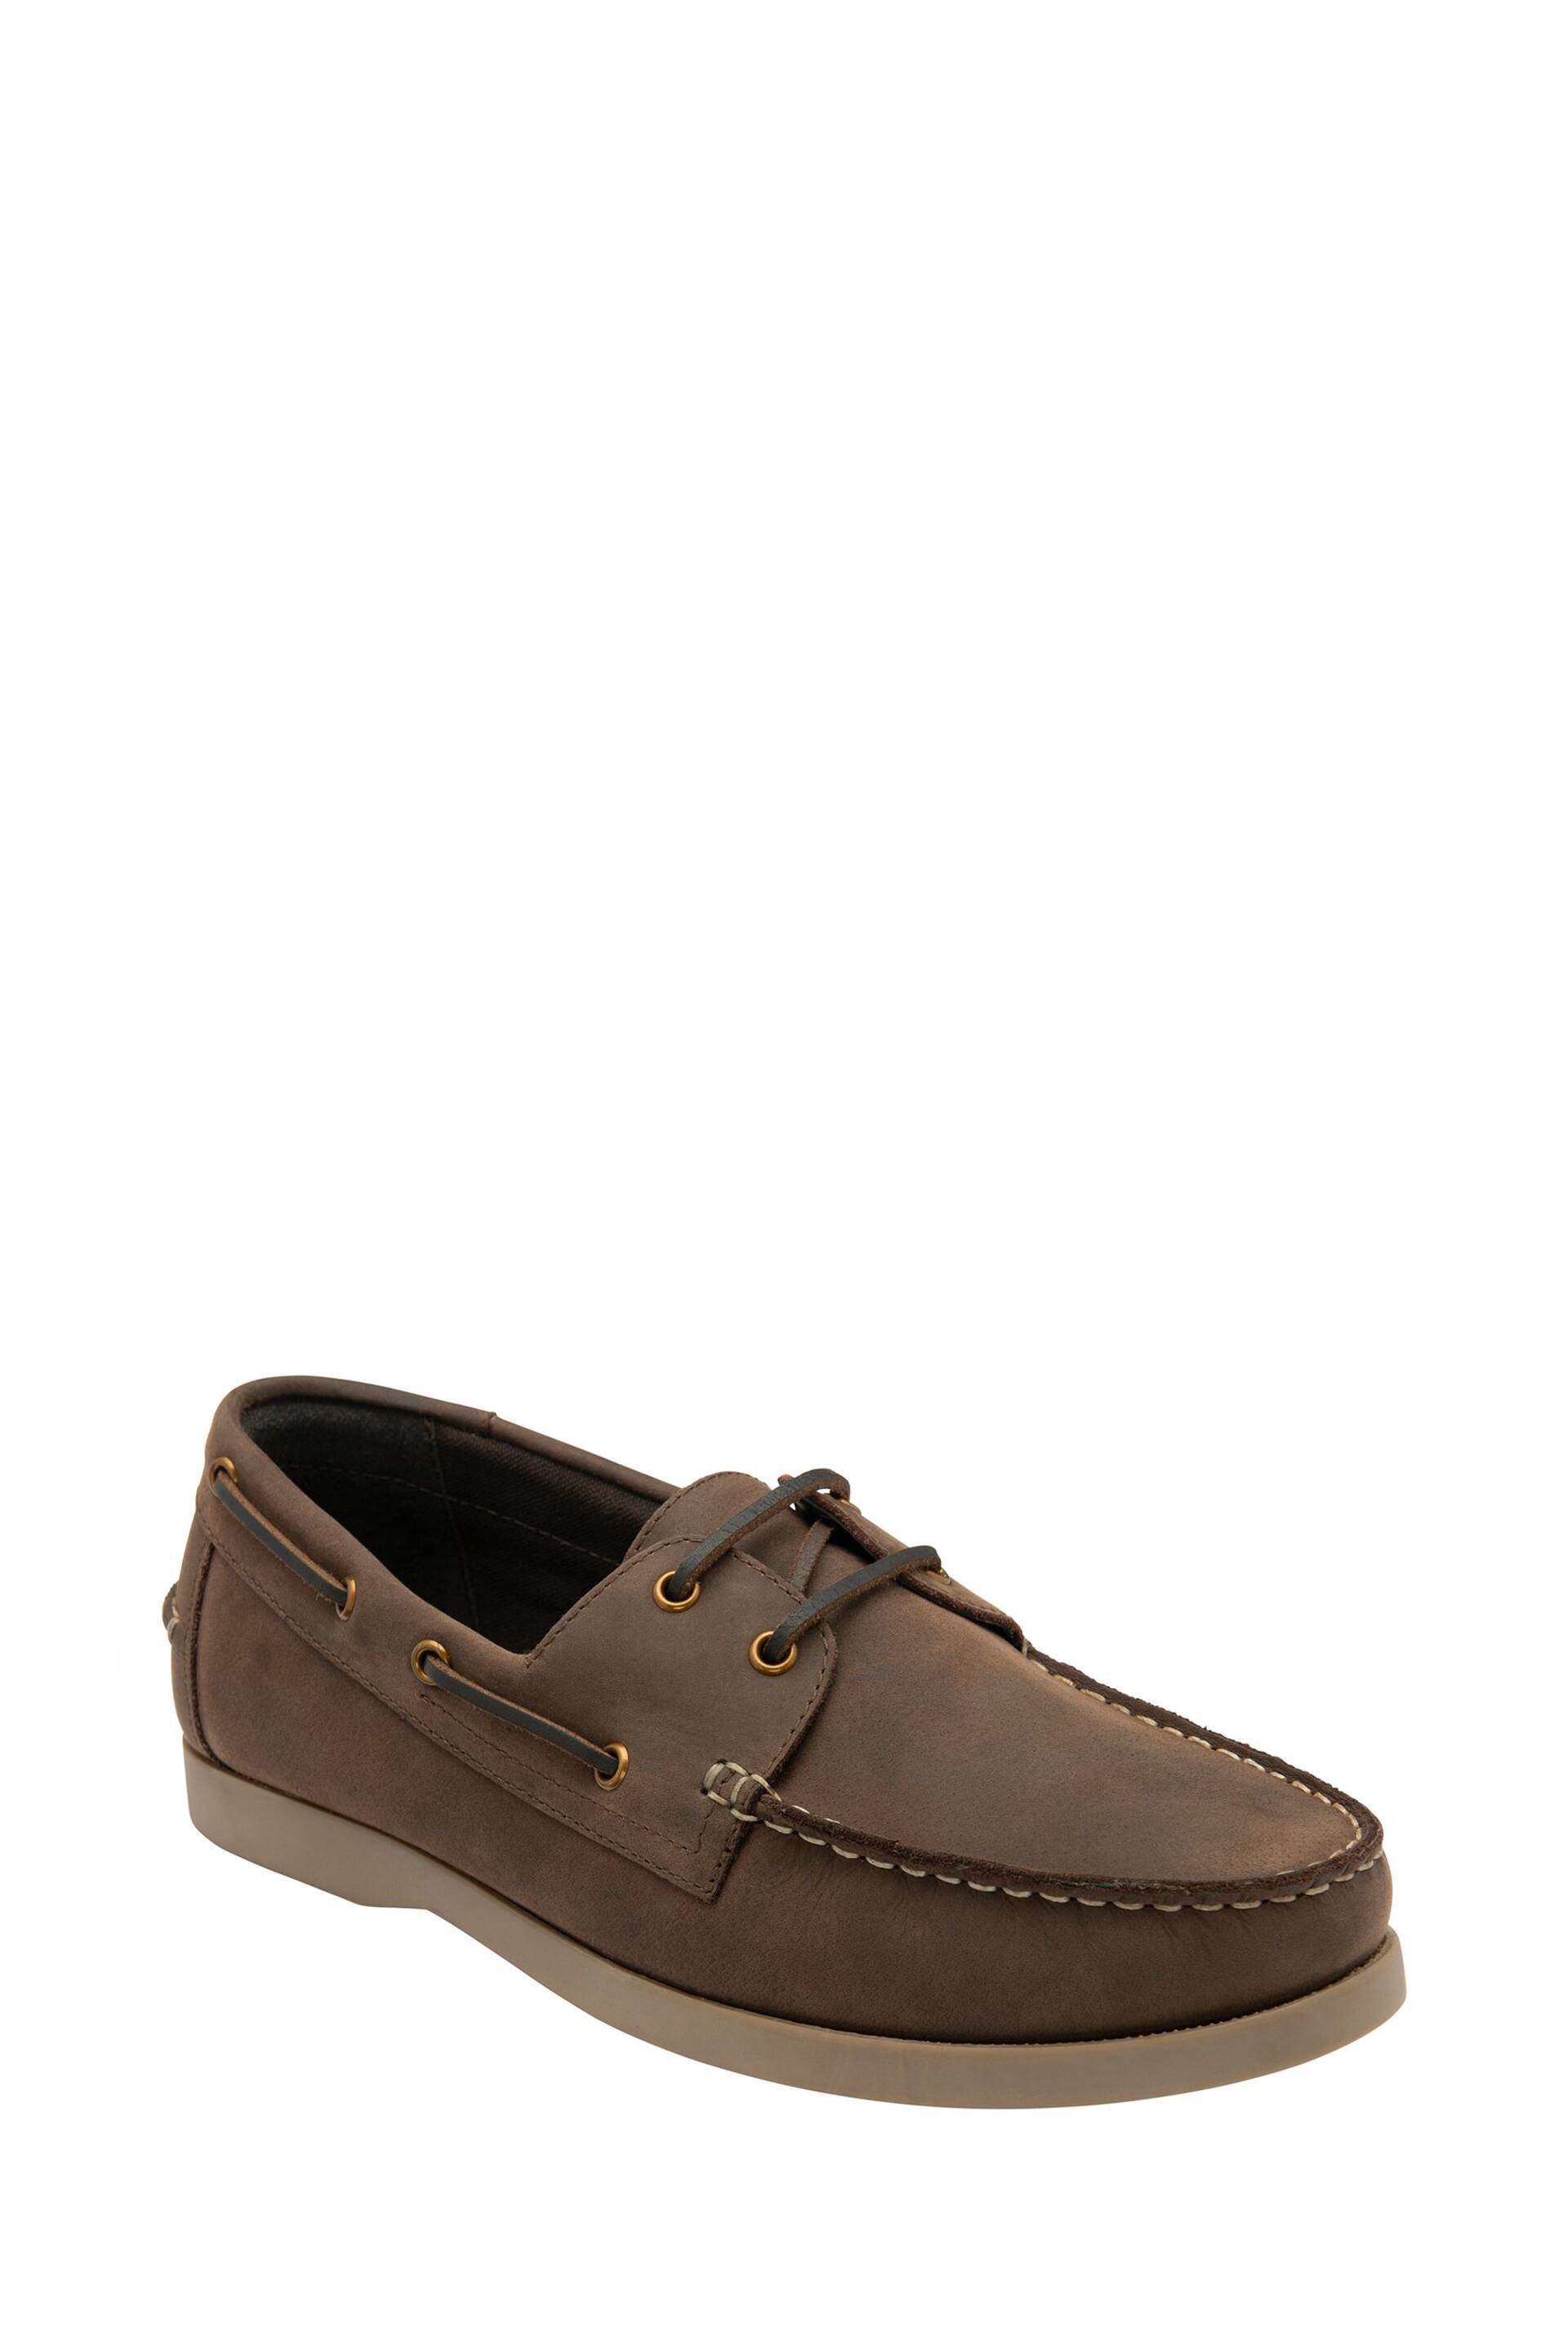 Lotus Brown Casual Boat Shoes - Image 1 of 4